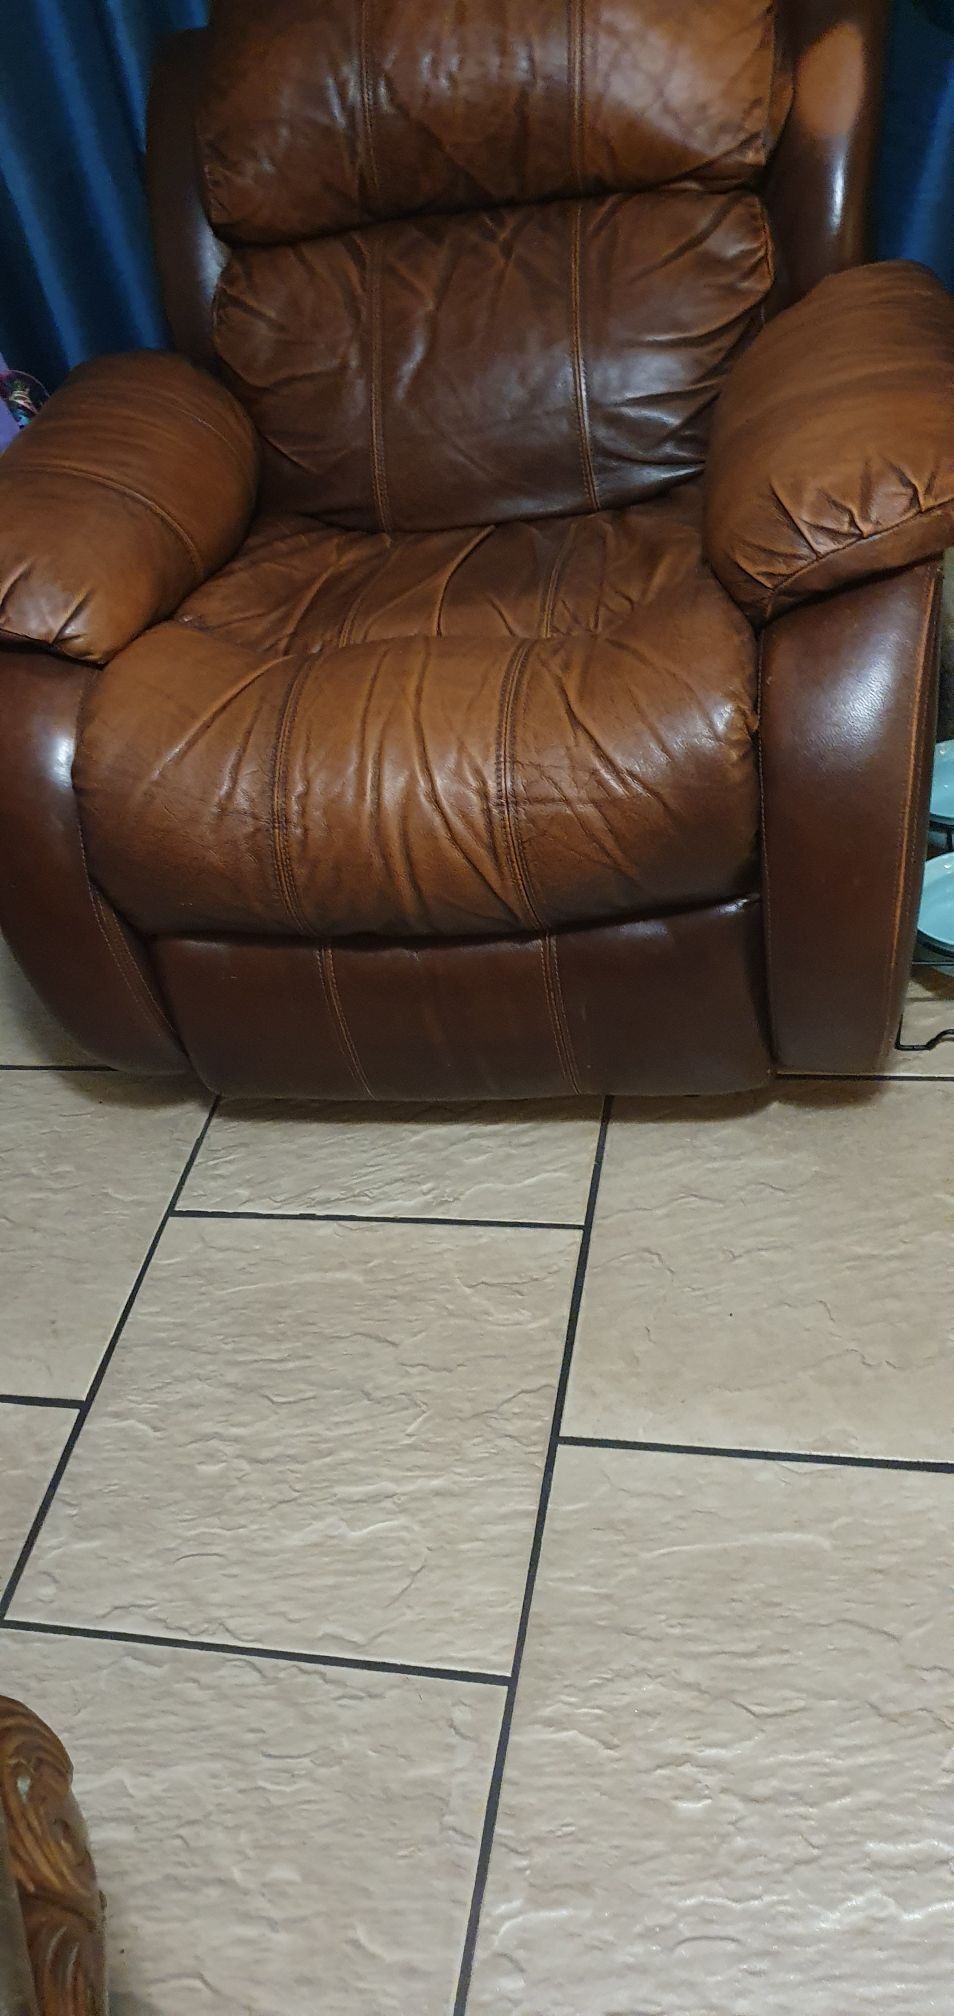 Sofa recliners for sale $150